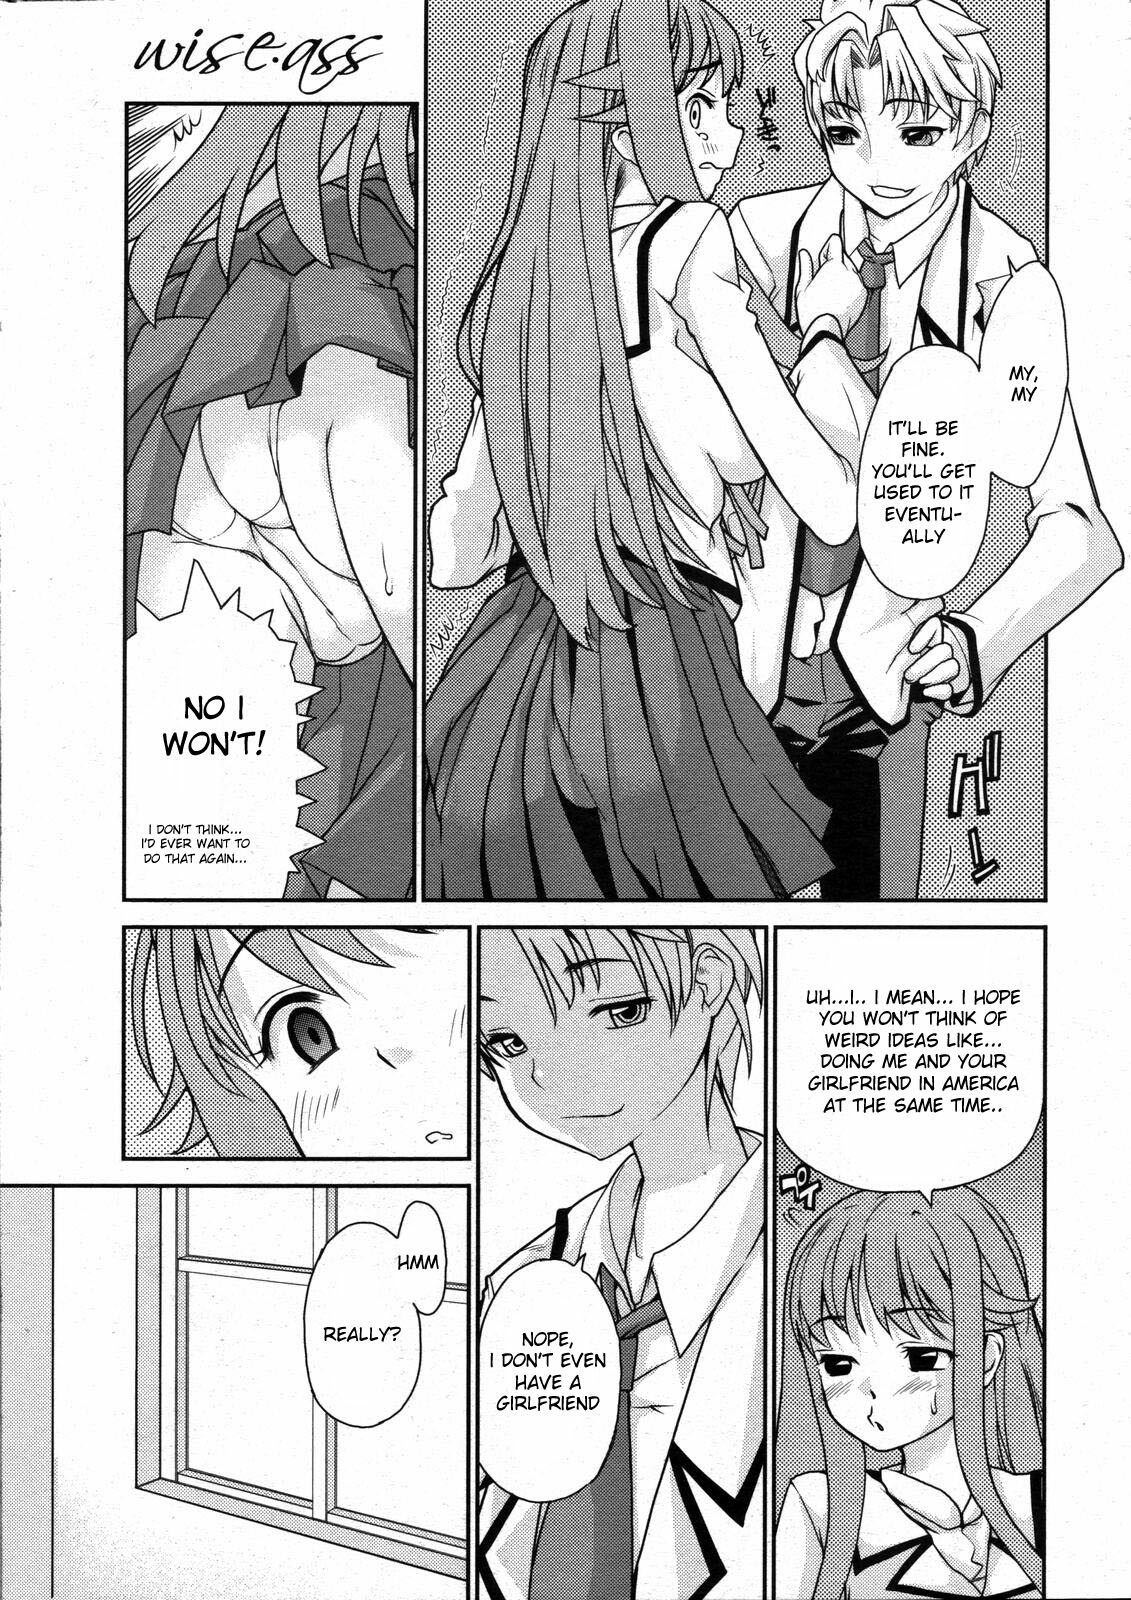 [Tomoe Tenbu] Wise Ass - Ch.1-6 (English)(DeCensored) page 27 full